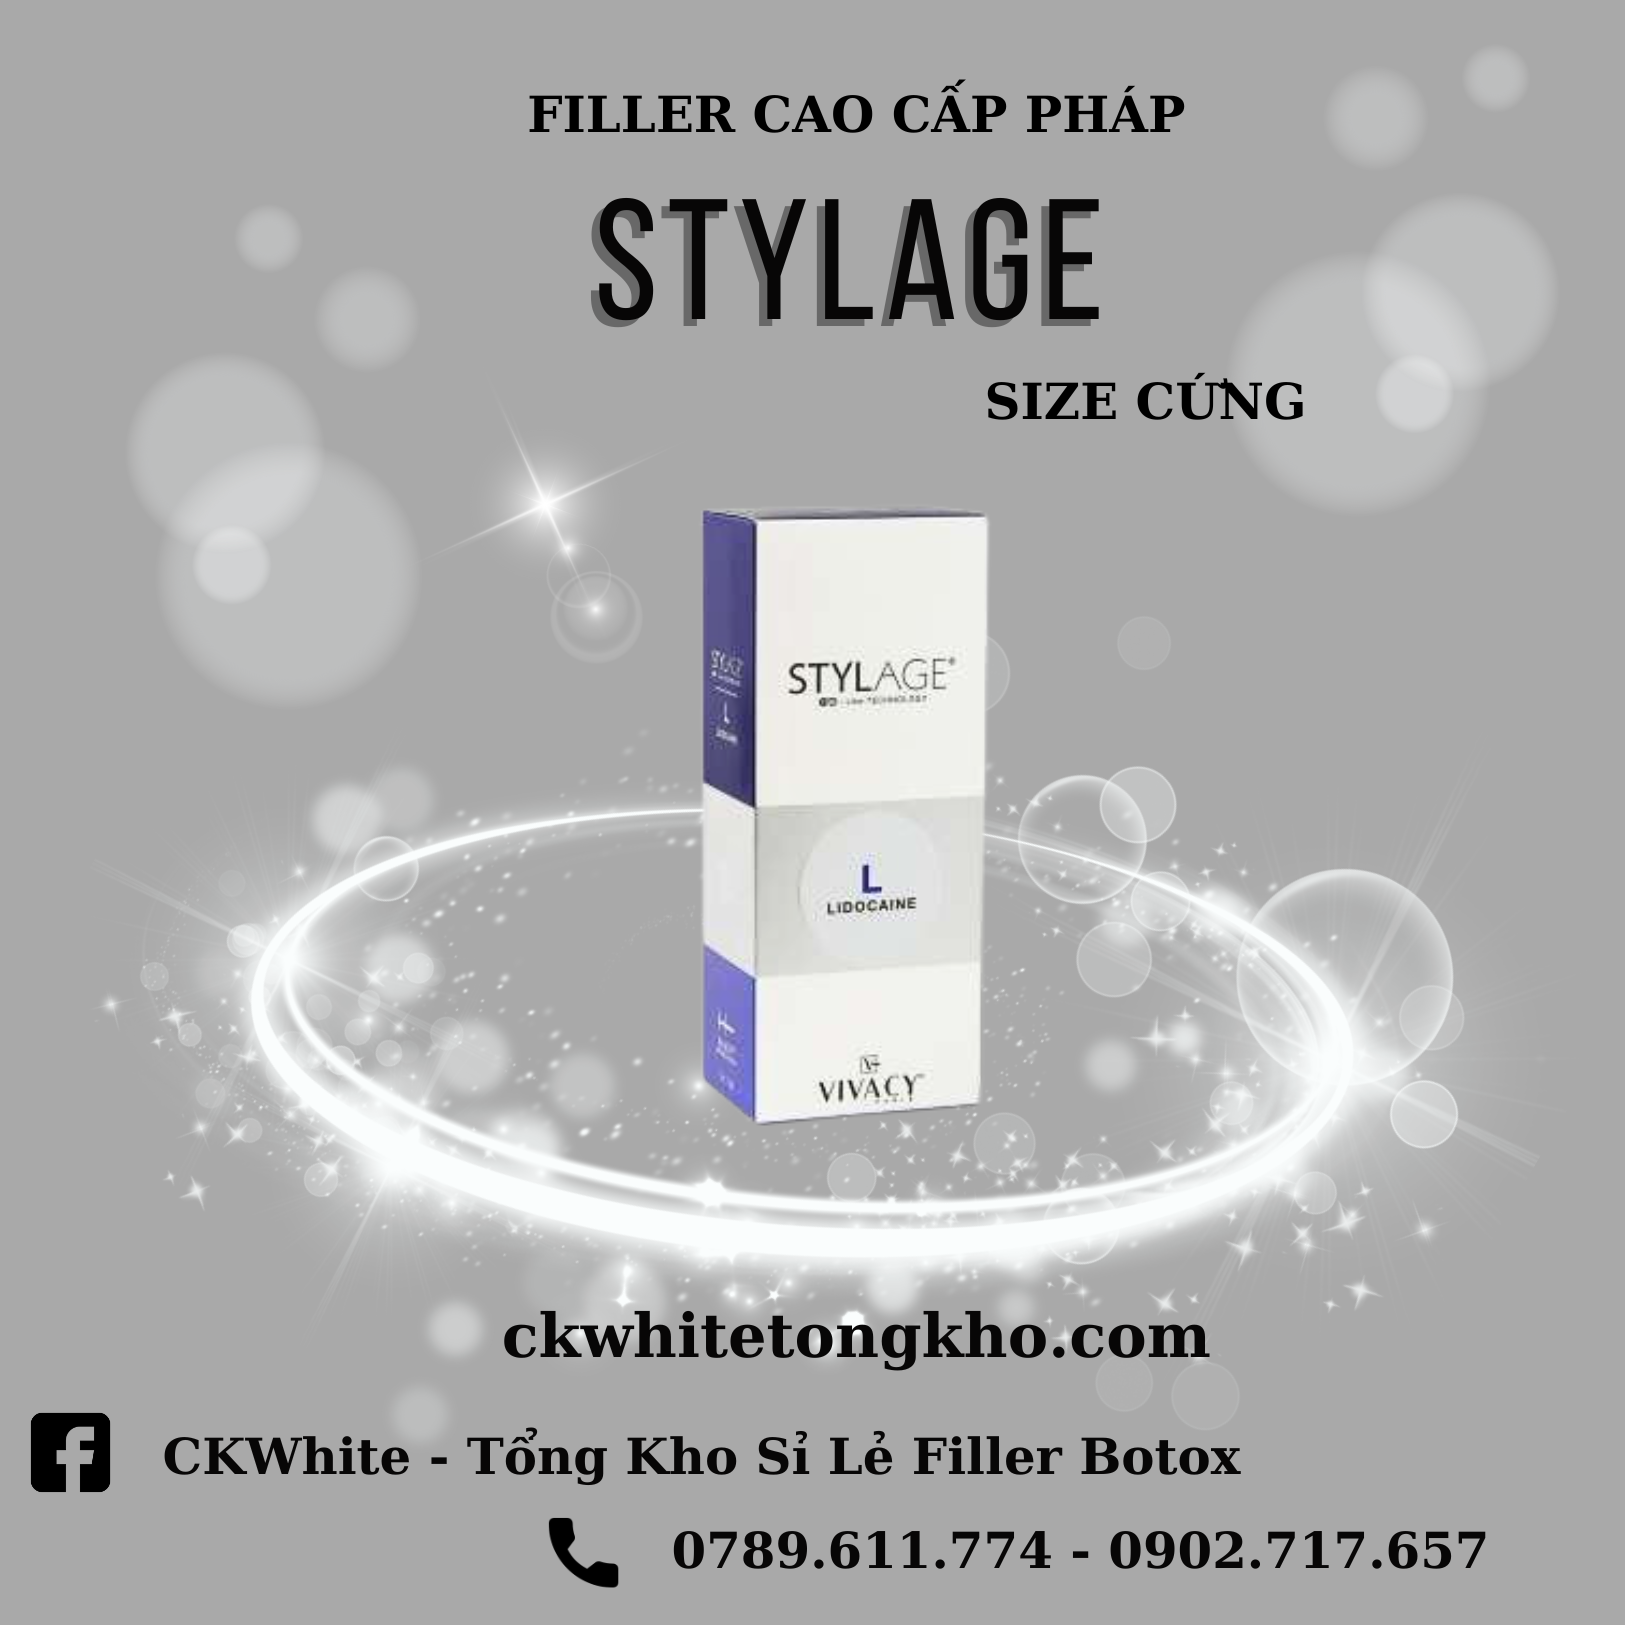 FILLER CAO CẤP PHÁP STYLAGE CỨNG